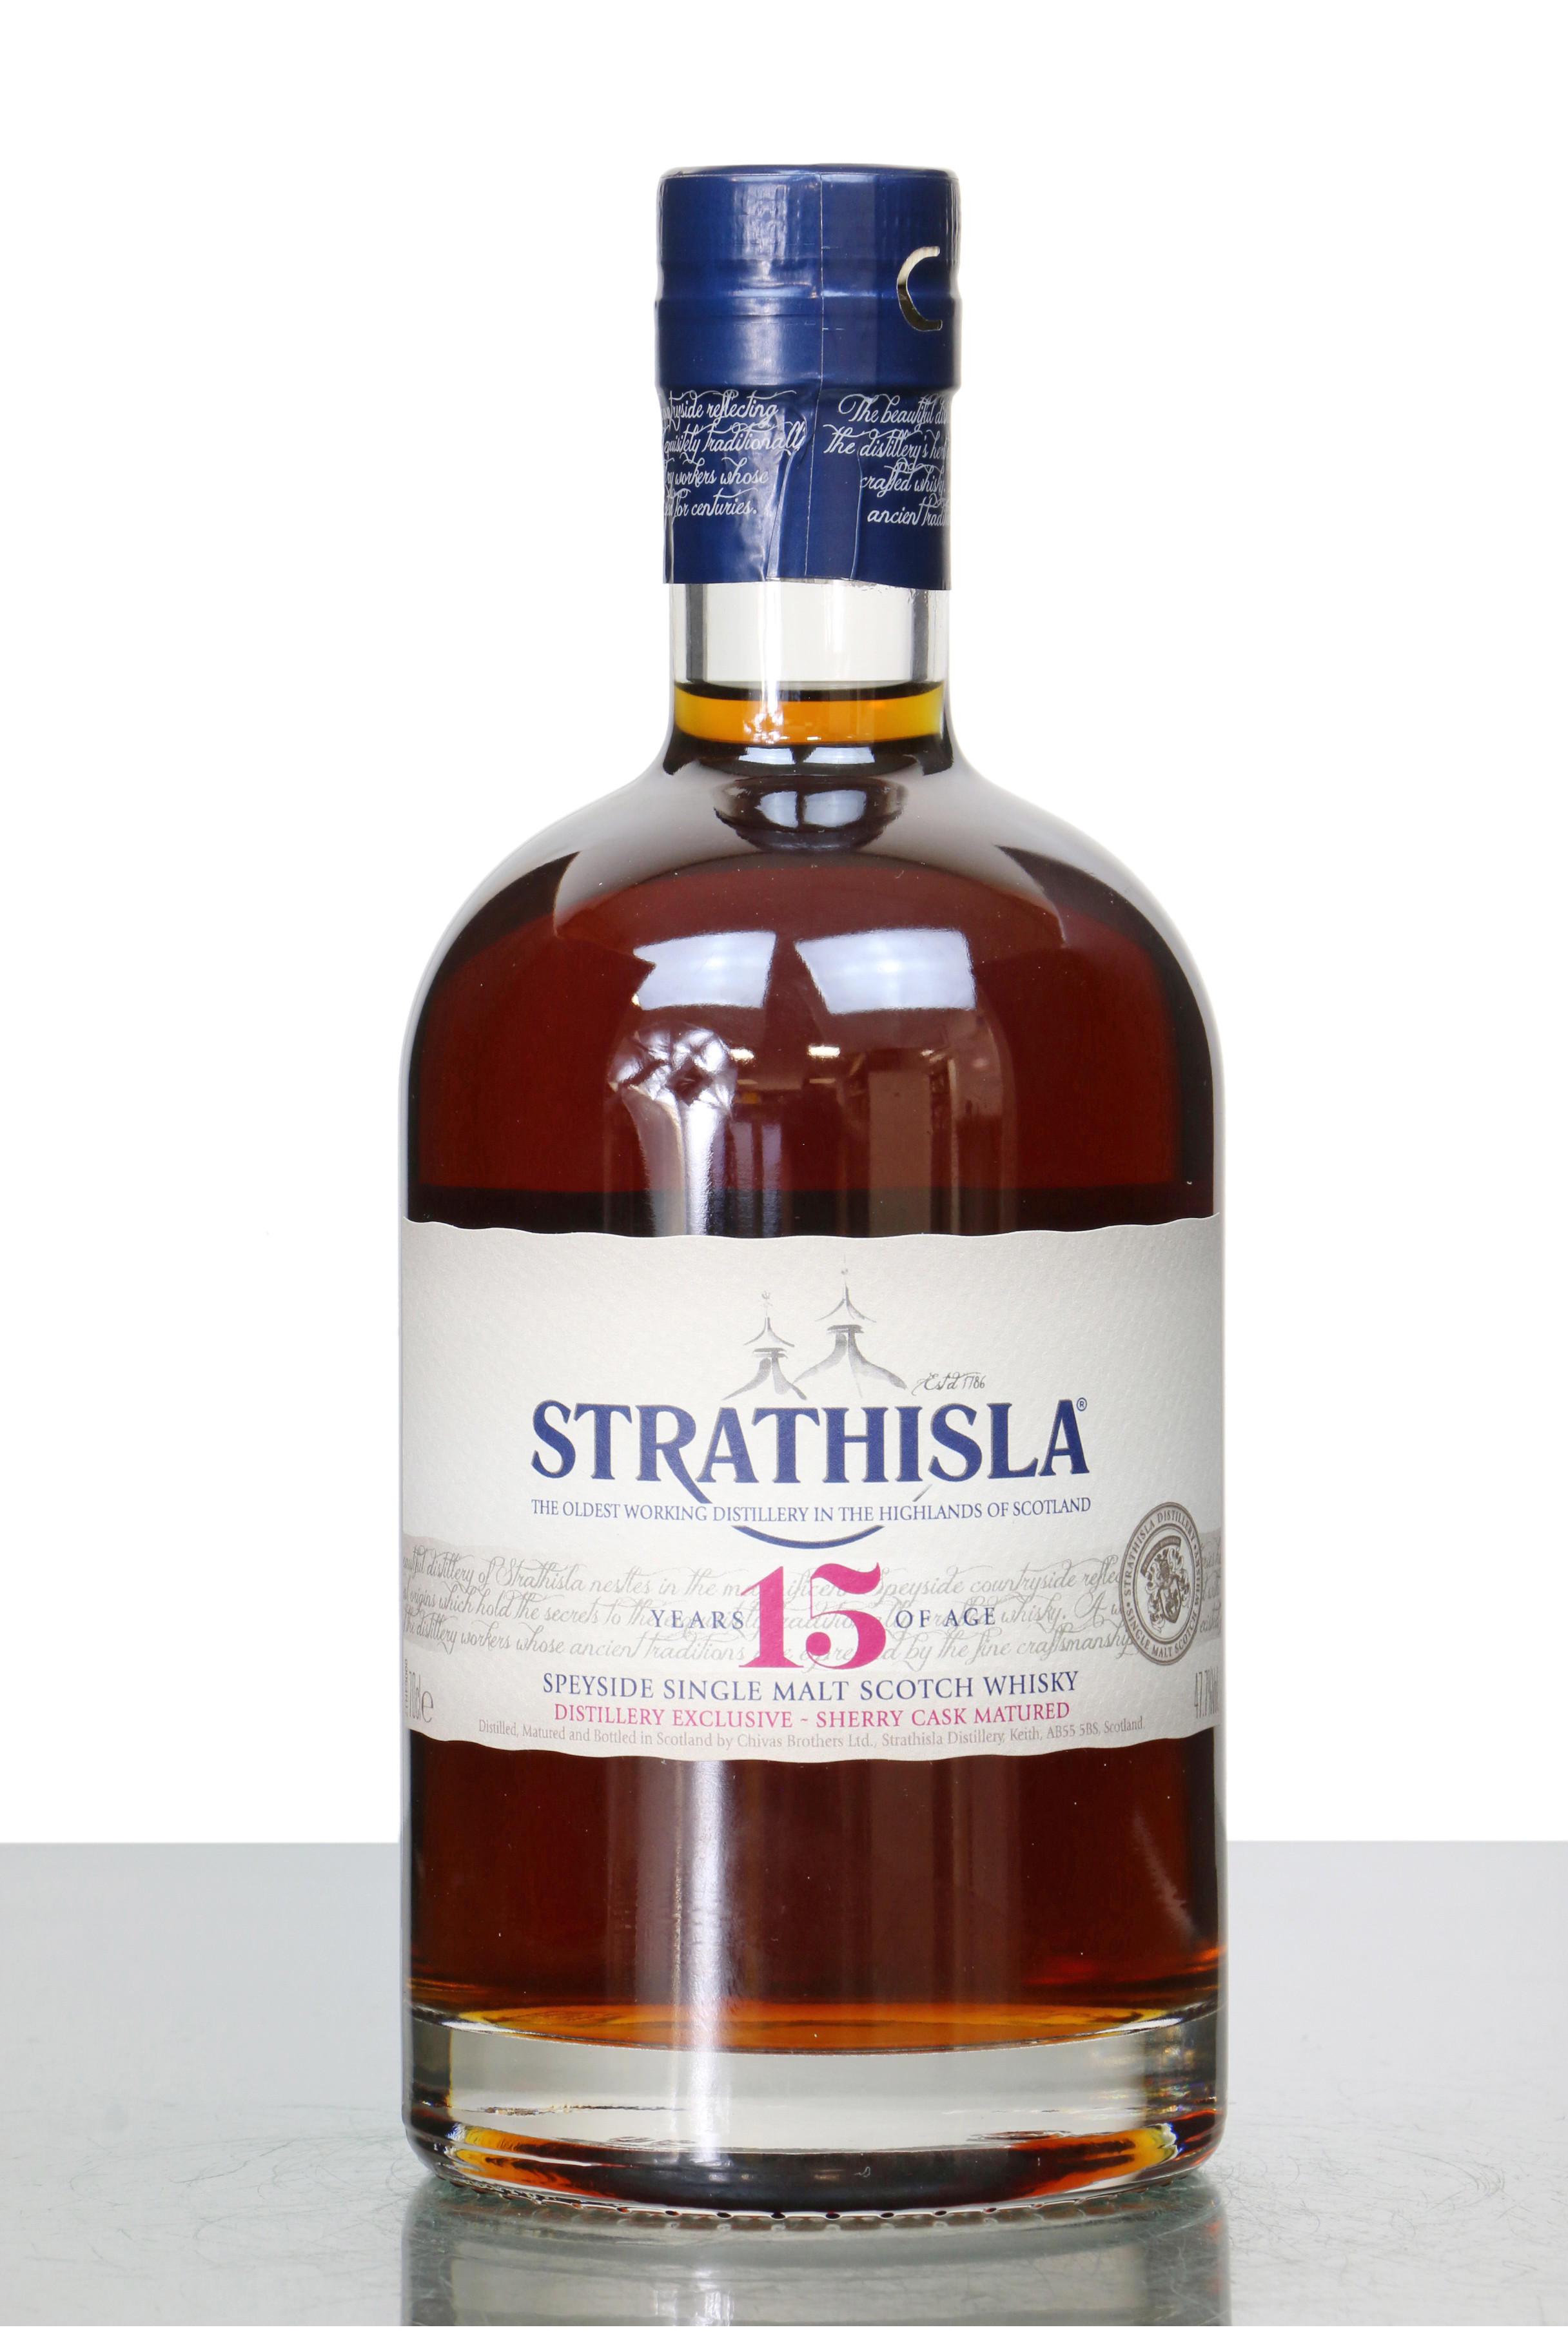 Strathisla 15 Years Old Distillery Exclusive Sherry Cask Matured